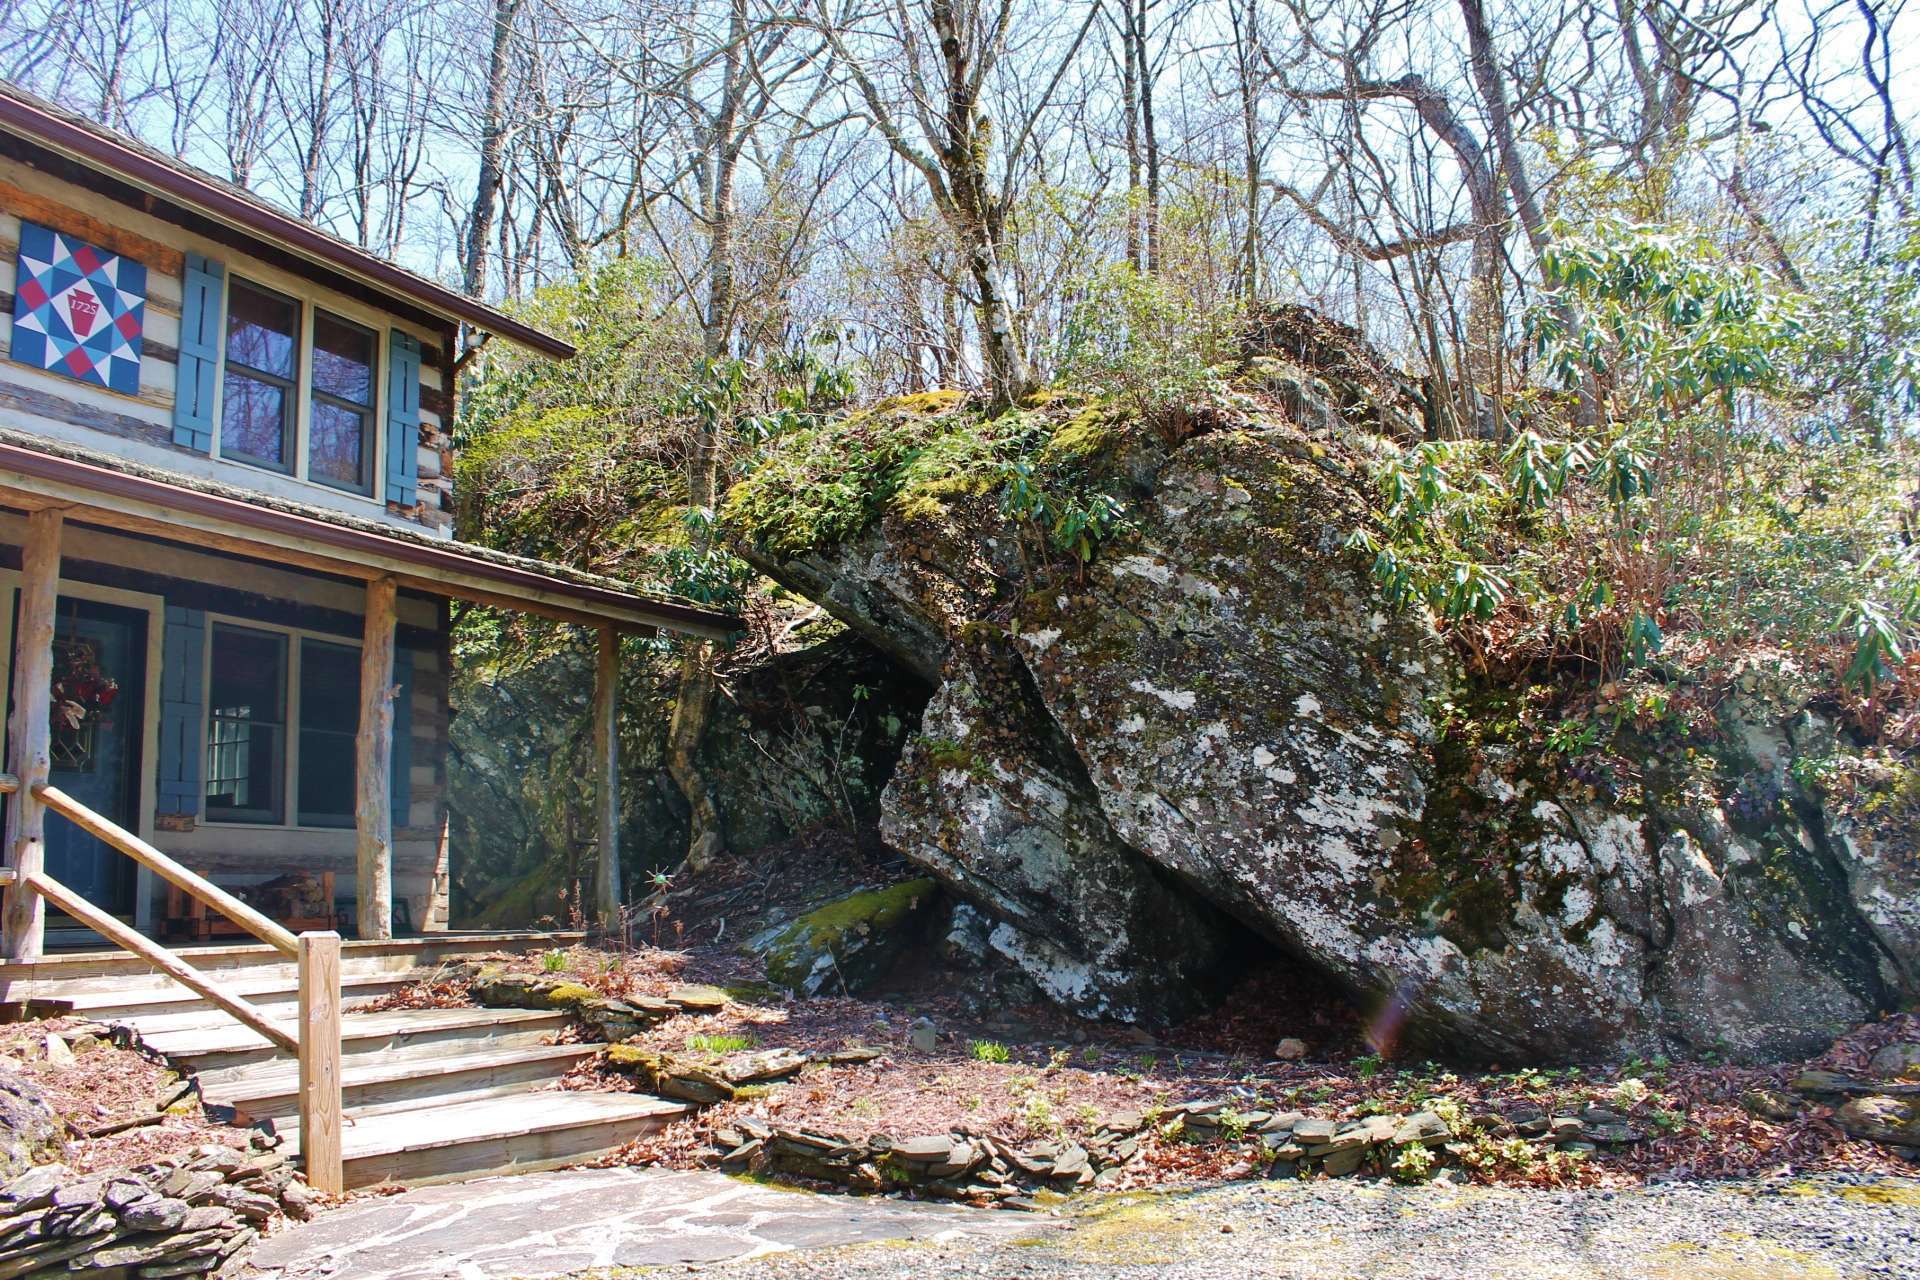 This classic Stonebridge cabin is well known to neighbors in this friendly log cabin community  as  "BIG ROCK".  A massive boulder and  rock formation runs the entire side of the cabin.